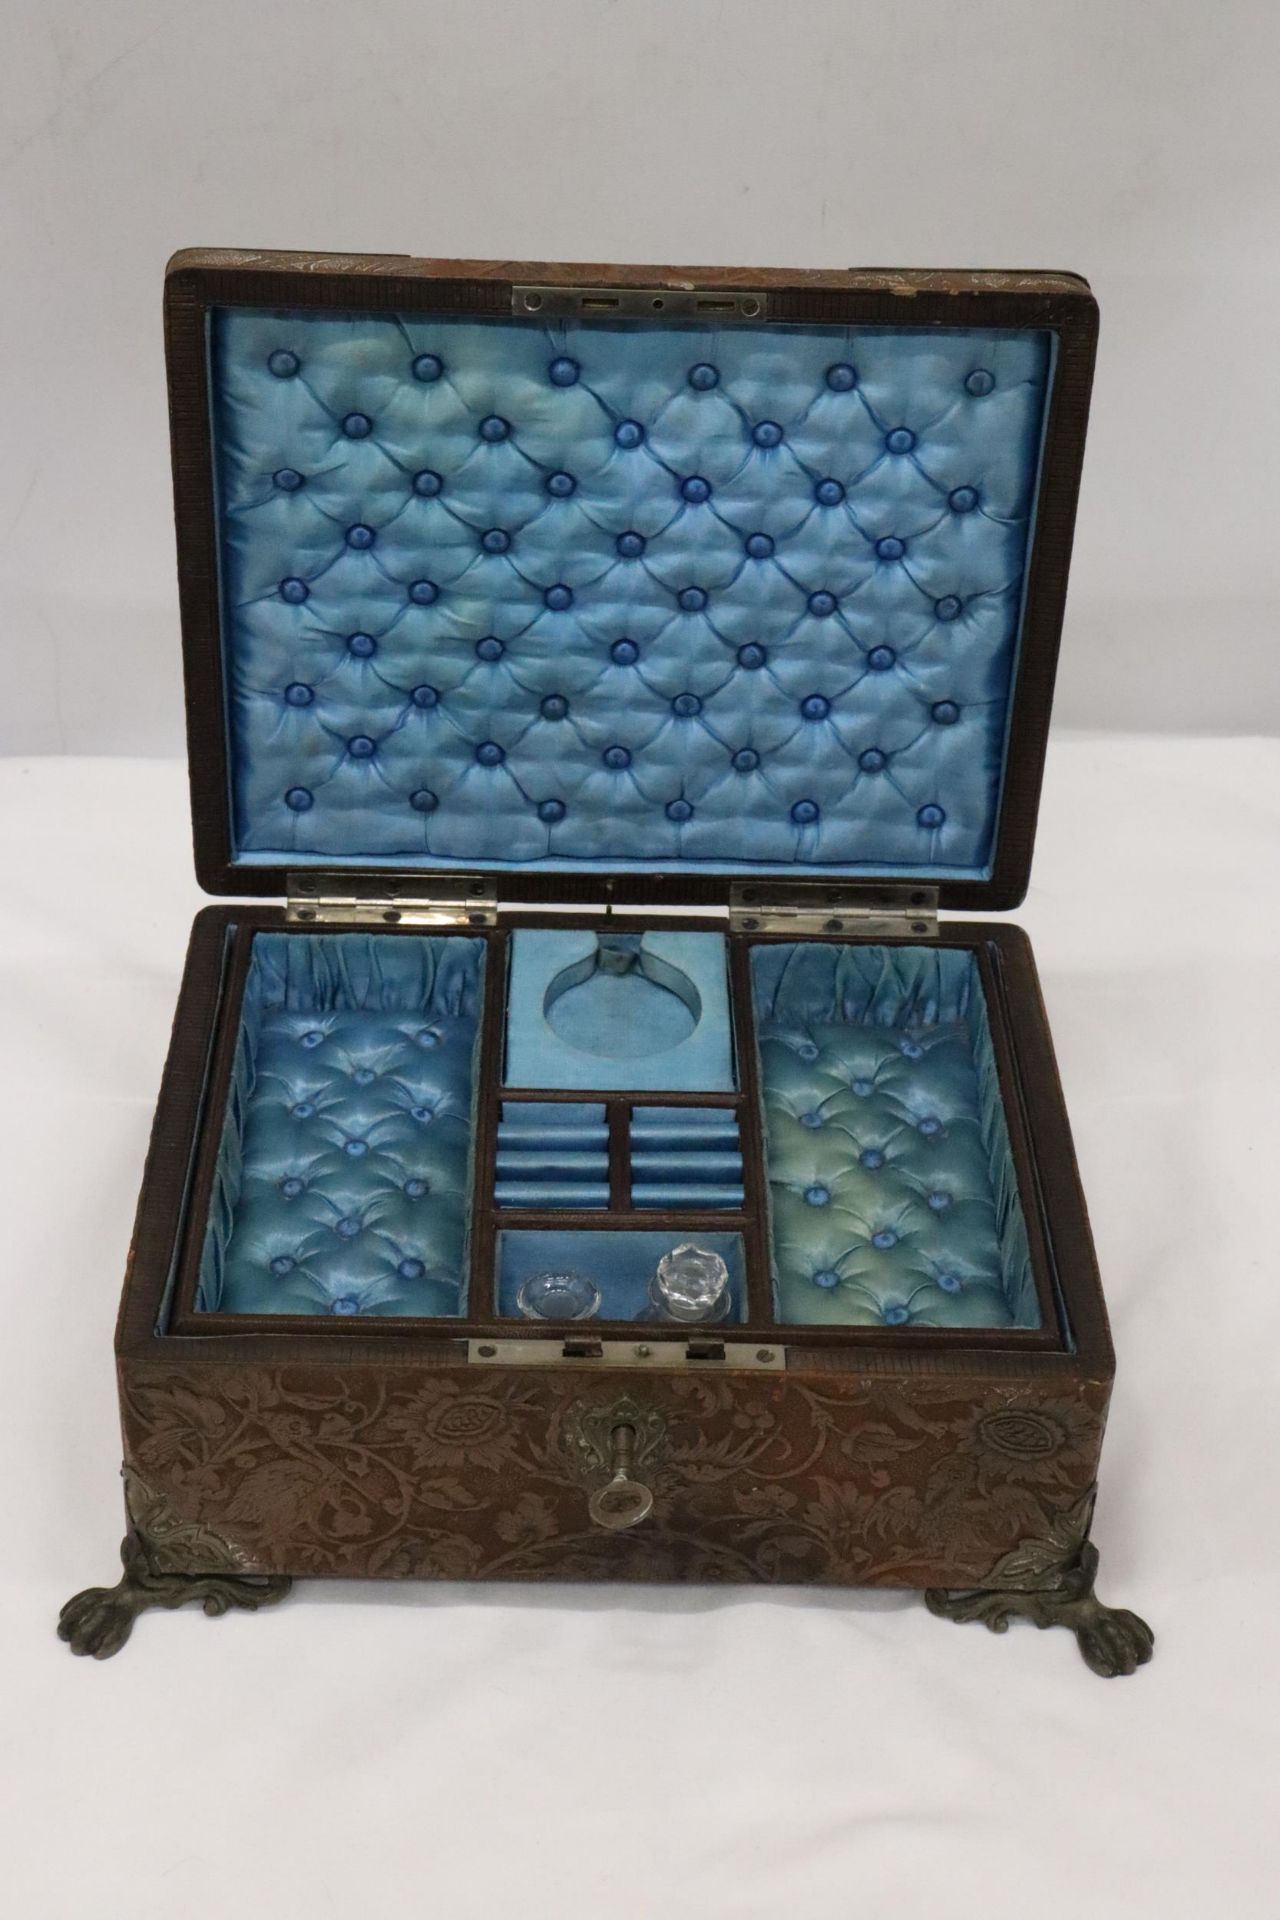 A SILK LINED, LEATHER CLAD JEWELLERY/SEWING BOX WITH TWO SCENT BOTTLES, A LIFT OUT COMPARTMENT AND